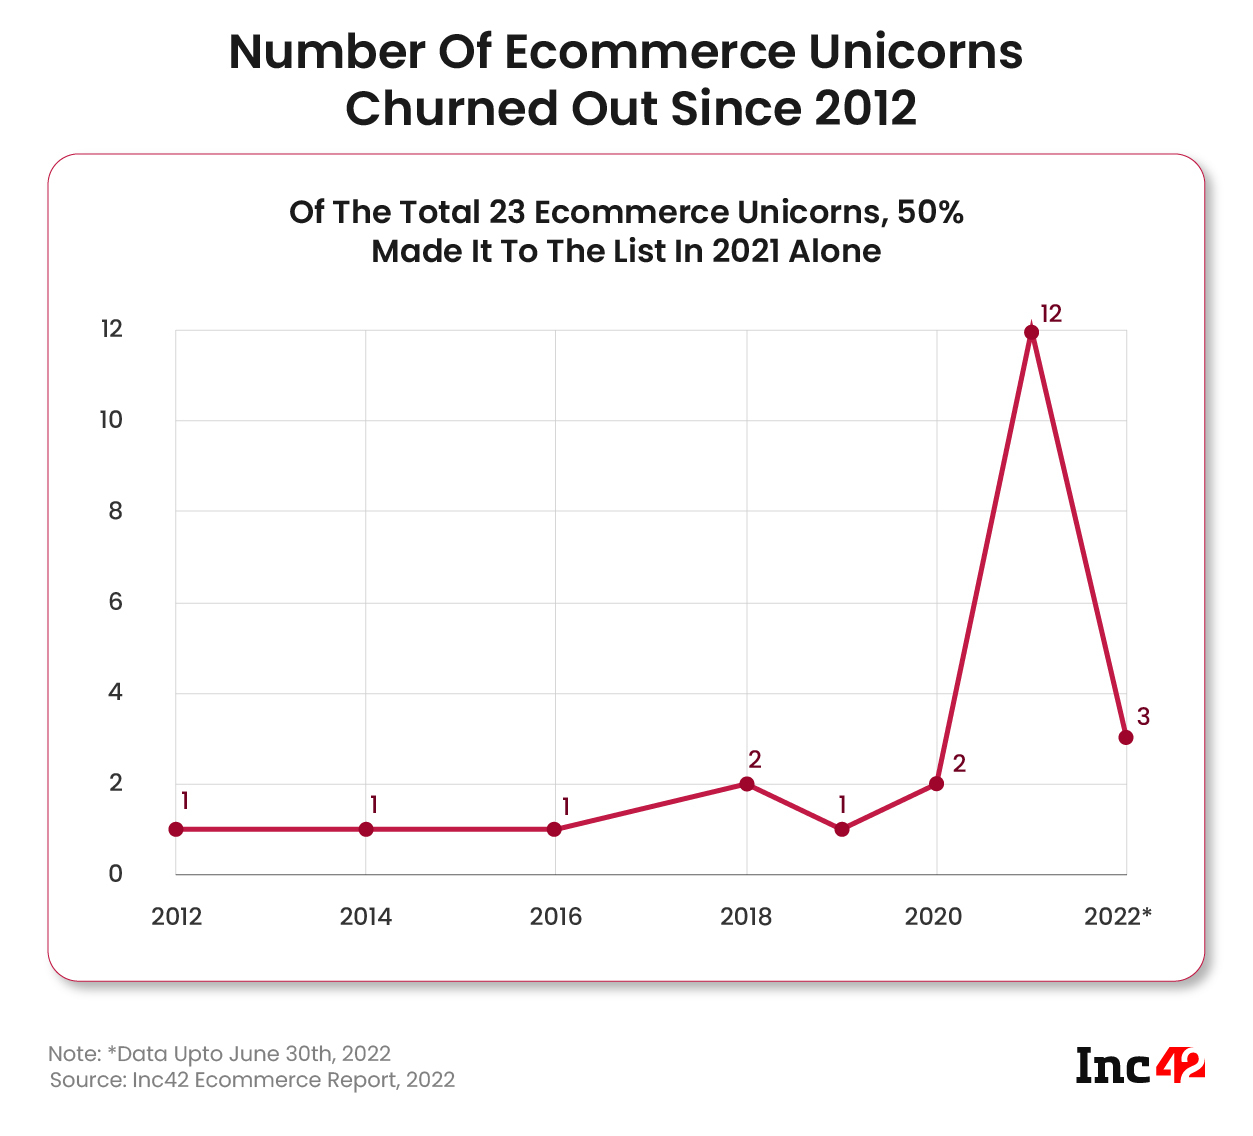 Number of ecommerce unicorns churned out since 2012